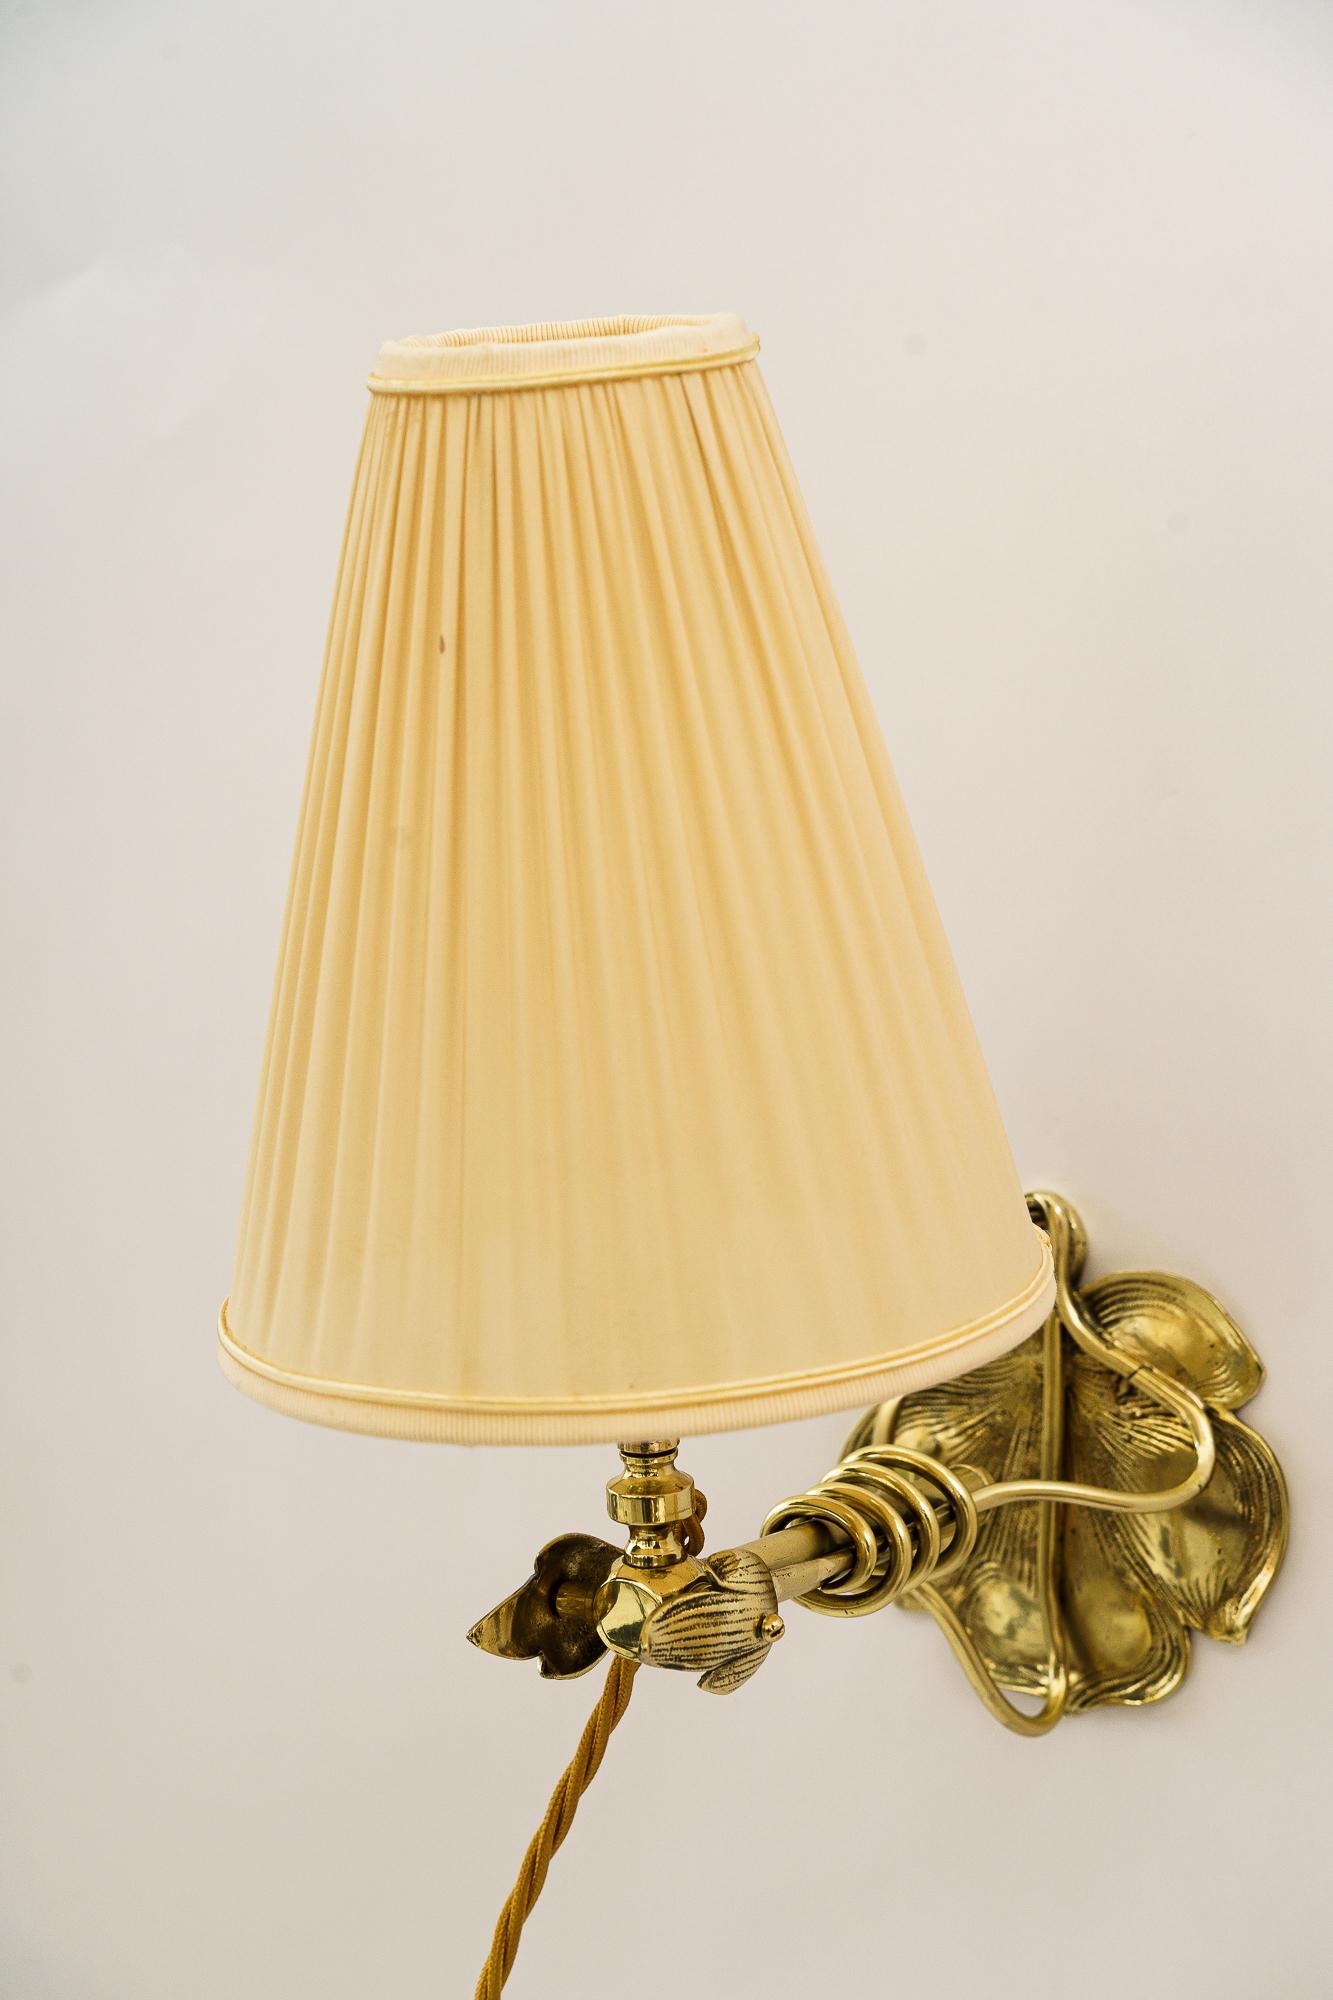 Jugendstil table lamp or wall lamp vienna around 1908 For Sale 9